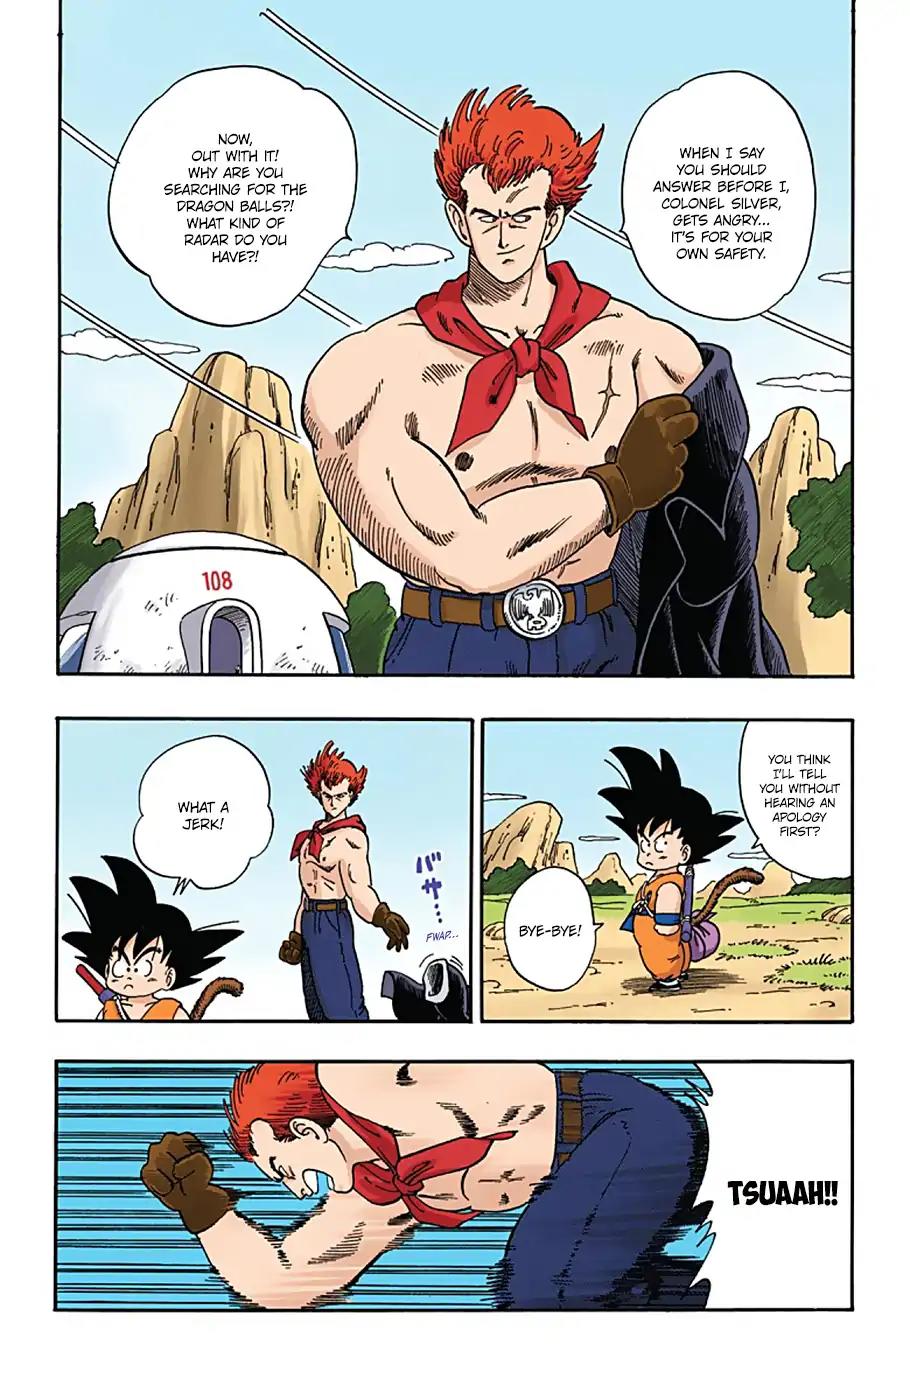 Dragon Ball - Full Color Vol.5 Chapter 56: